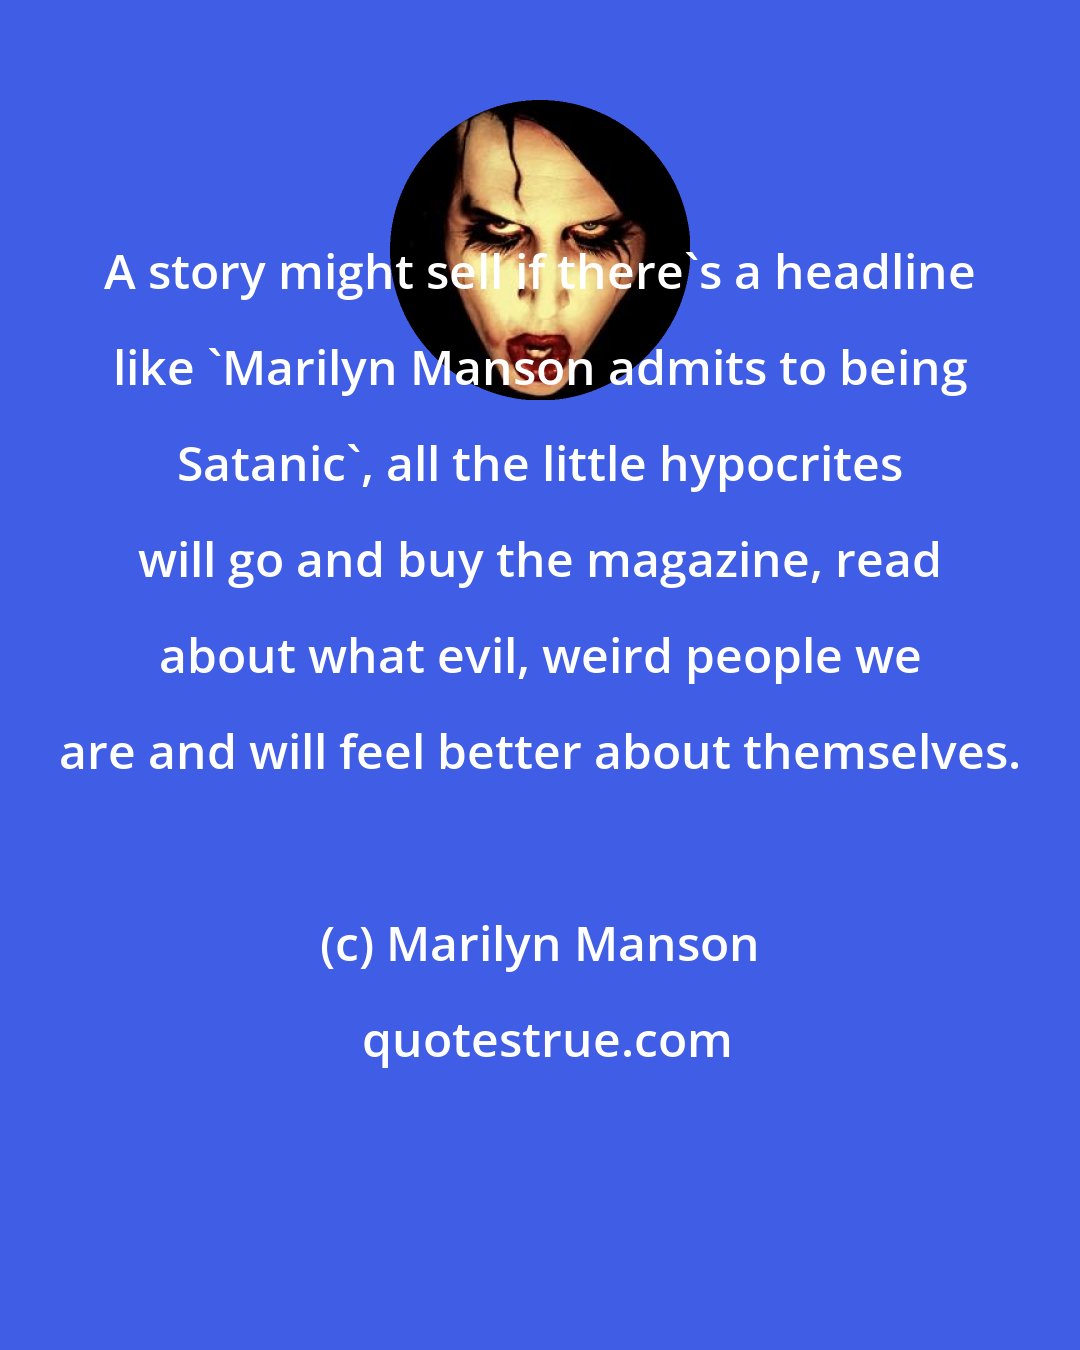 Marilyn Manson: A story might sell if there's a headline like 'Marilyn Manson admits to being Satanic', all the little hypocrites will go and buy the magazine, read about what evil, weird people we are and will feel better about themselves.